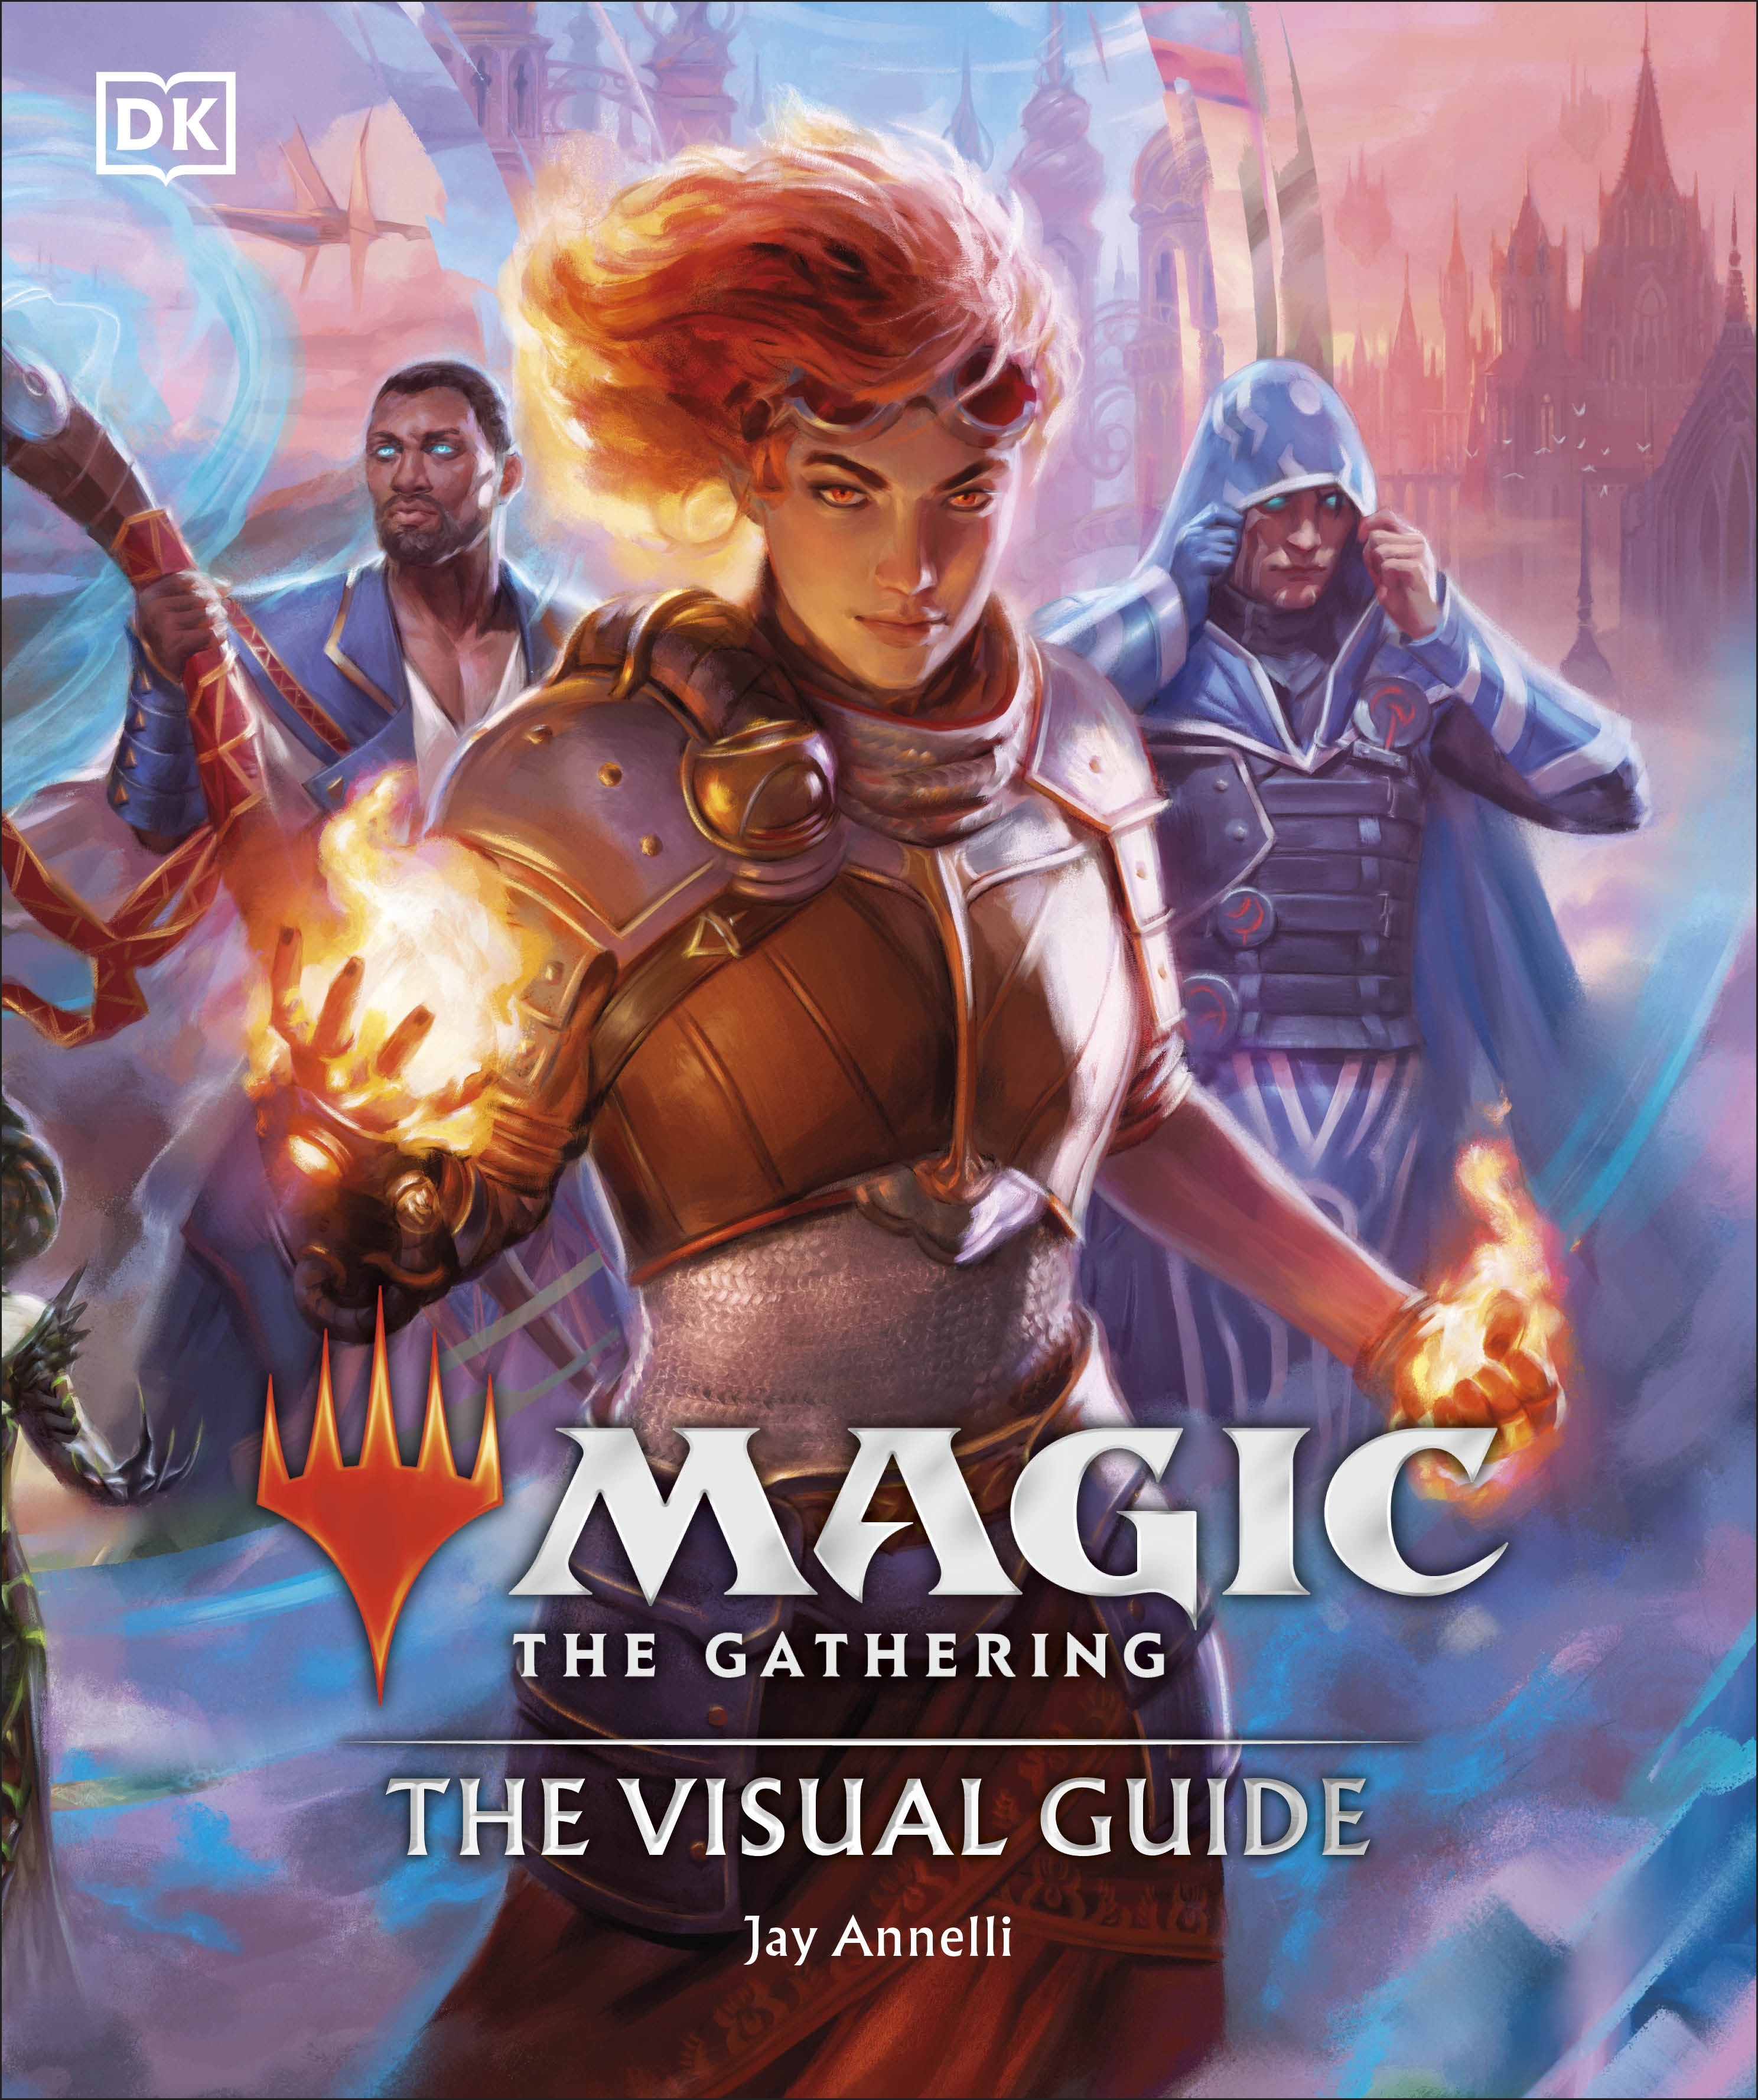 Magic The Gathering The Visual Guide by Jay Annelli - Penguin